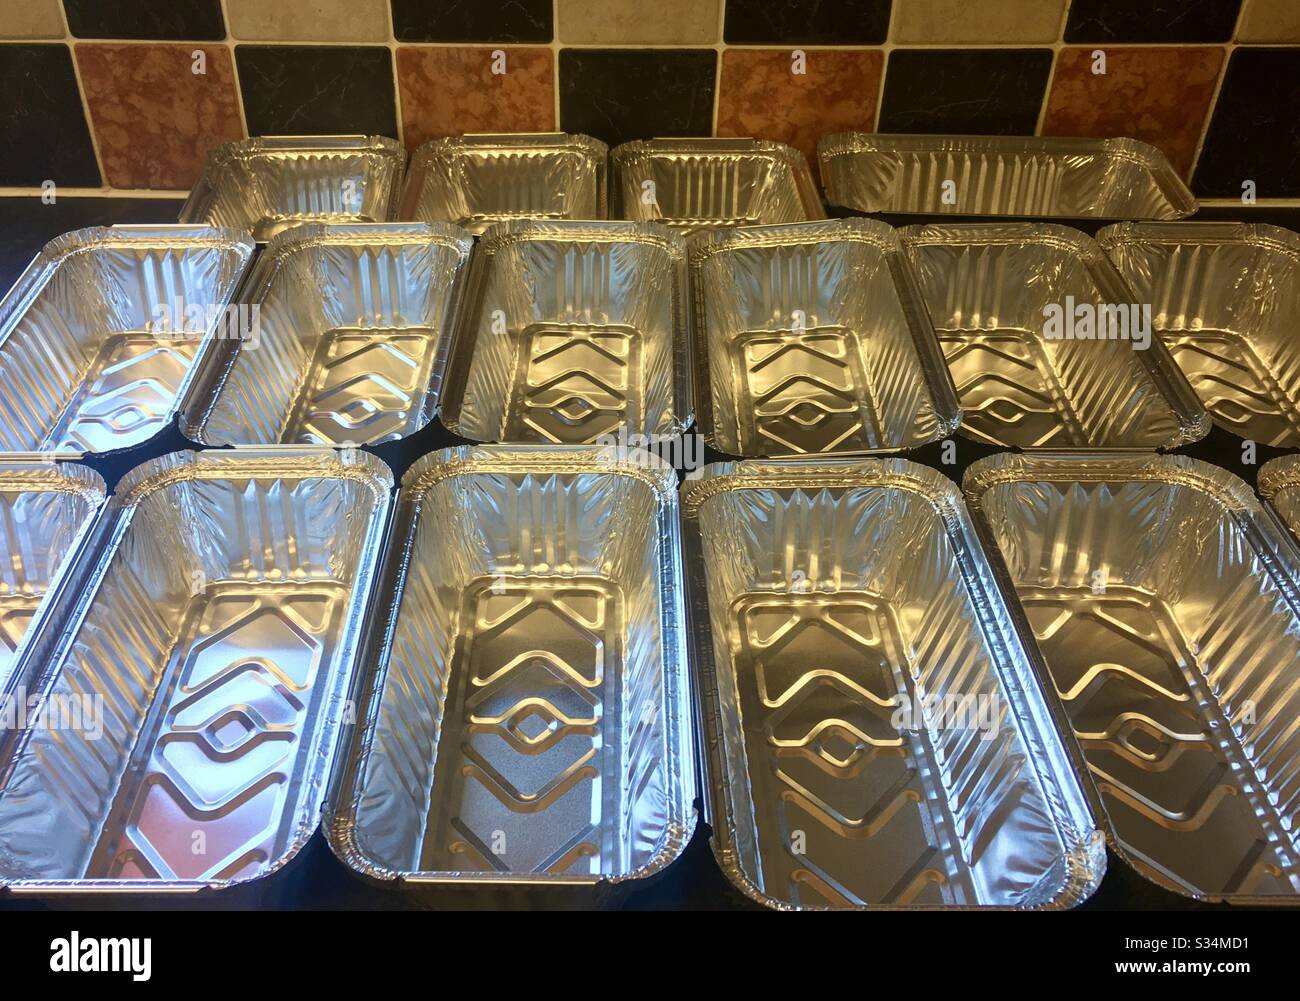 https://c8.alamy.com/comp/S34MD1/tin-foil-containers-ready-to-be-filled-in-a-prep-kitchen-S34MD1.jpg